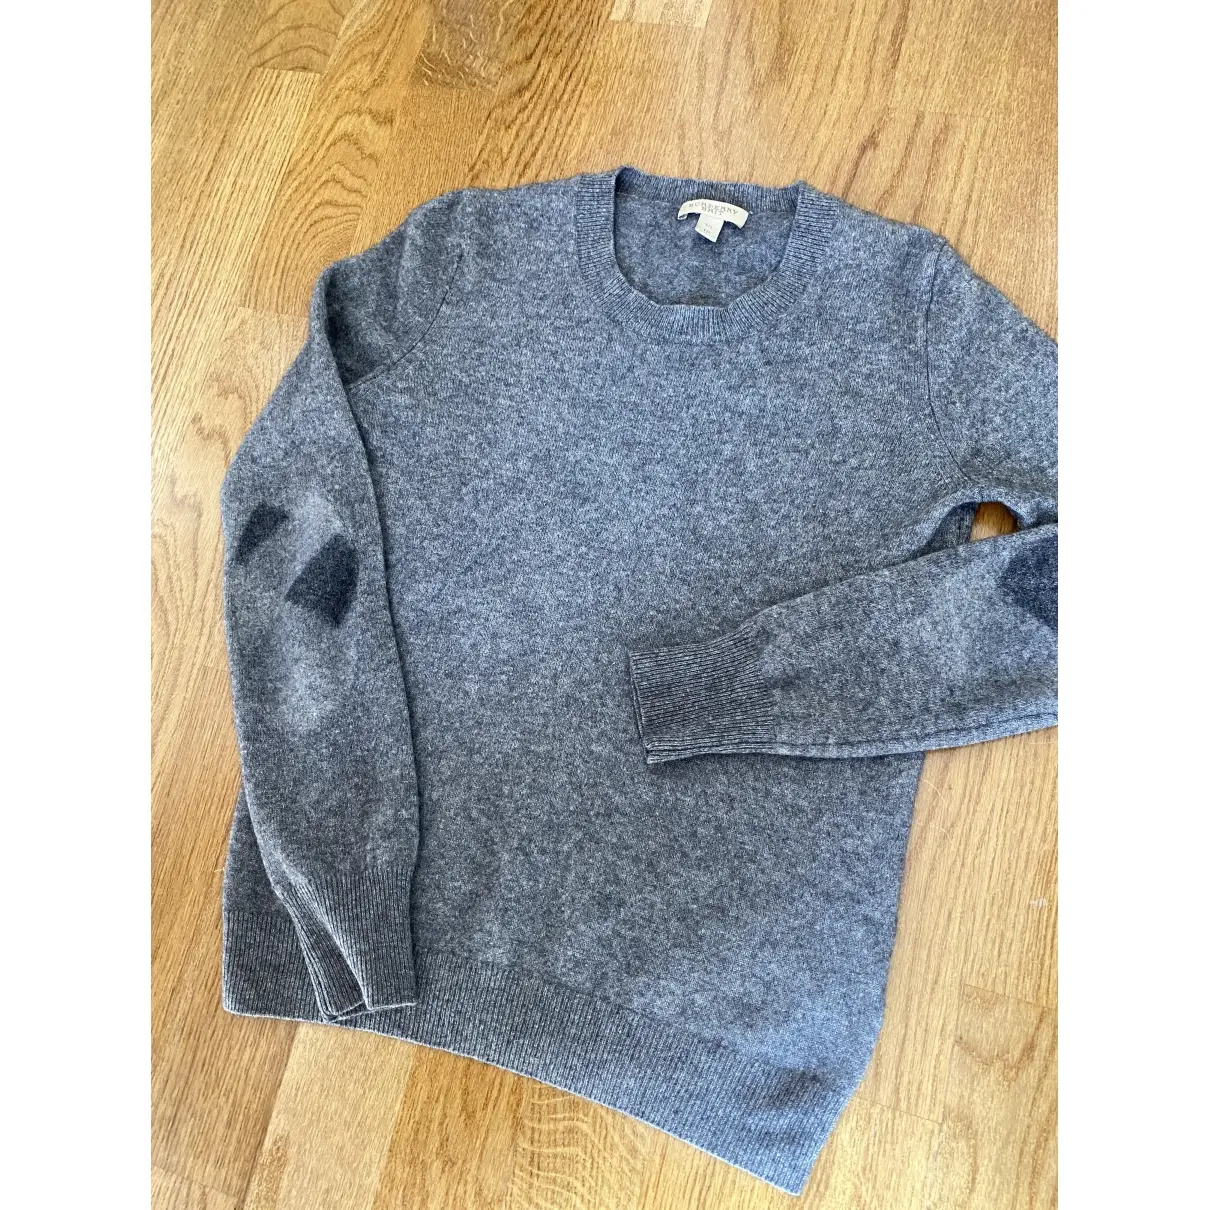 Burberry Cashmere jumper for sale